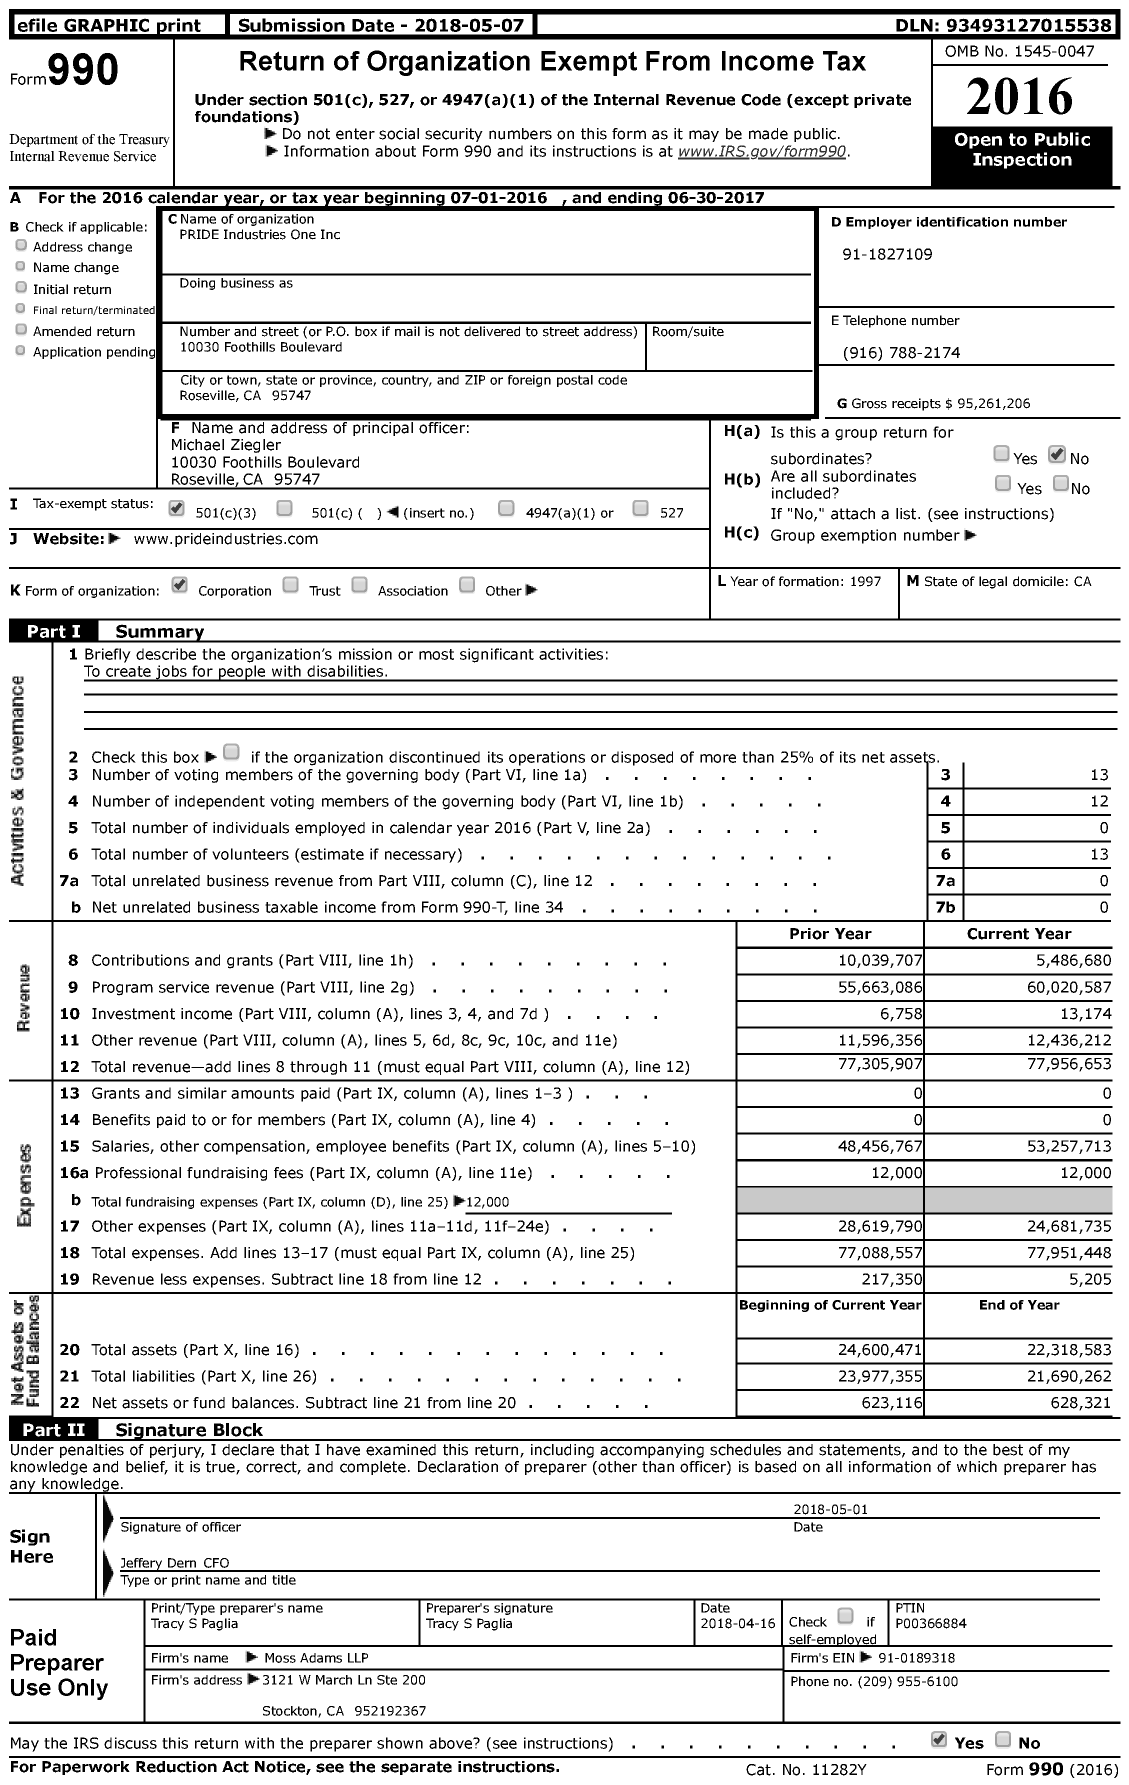 Image of first page of 2016 Form 990 for PRIDE Industries One